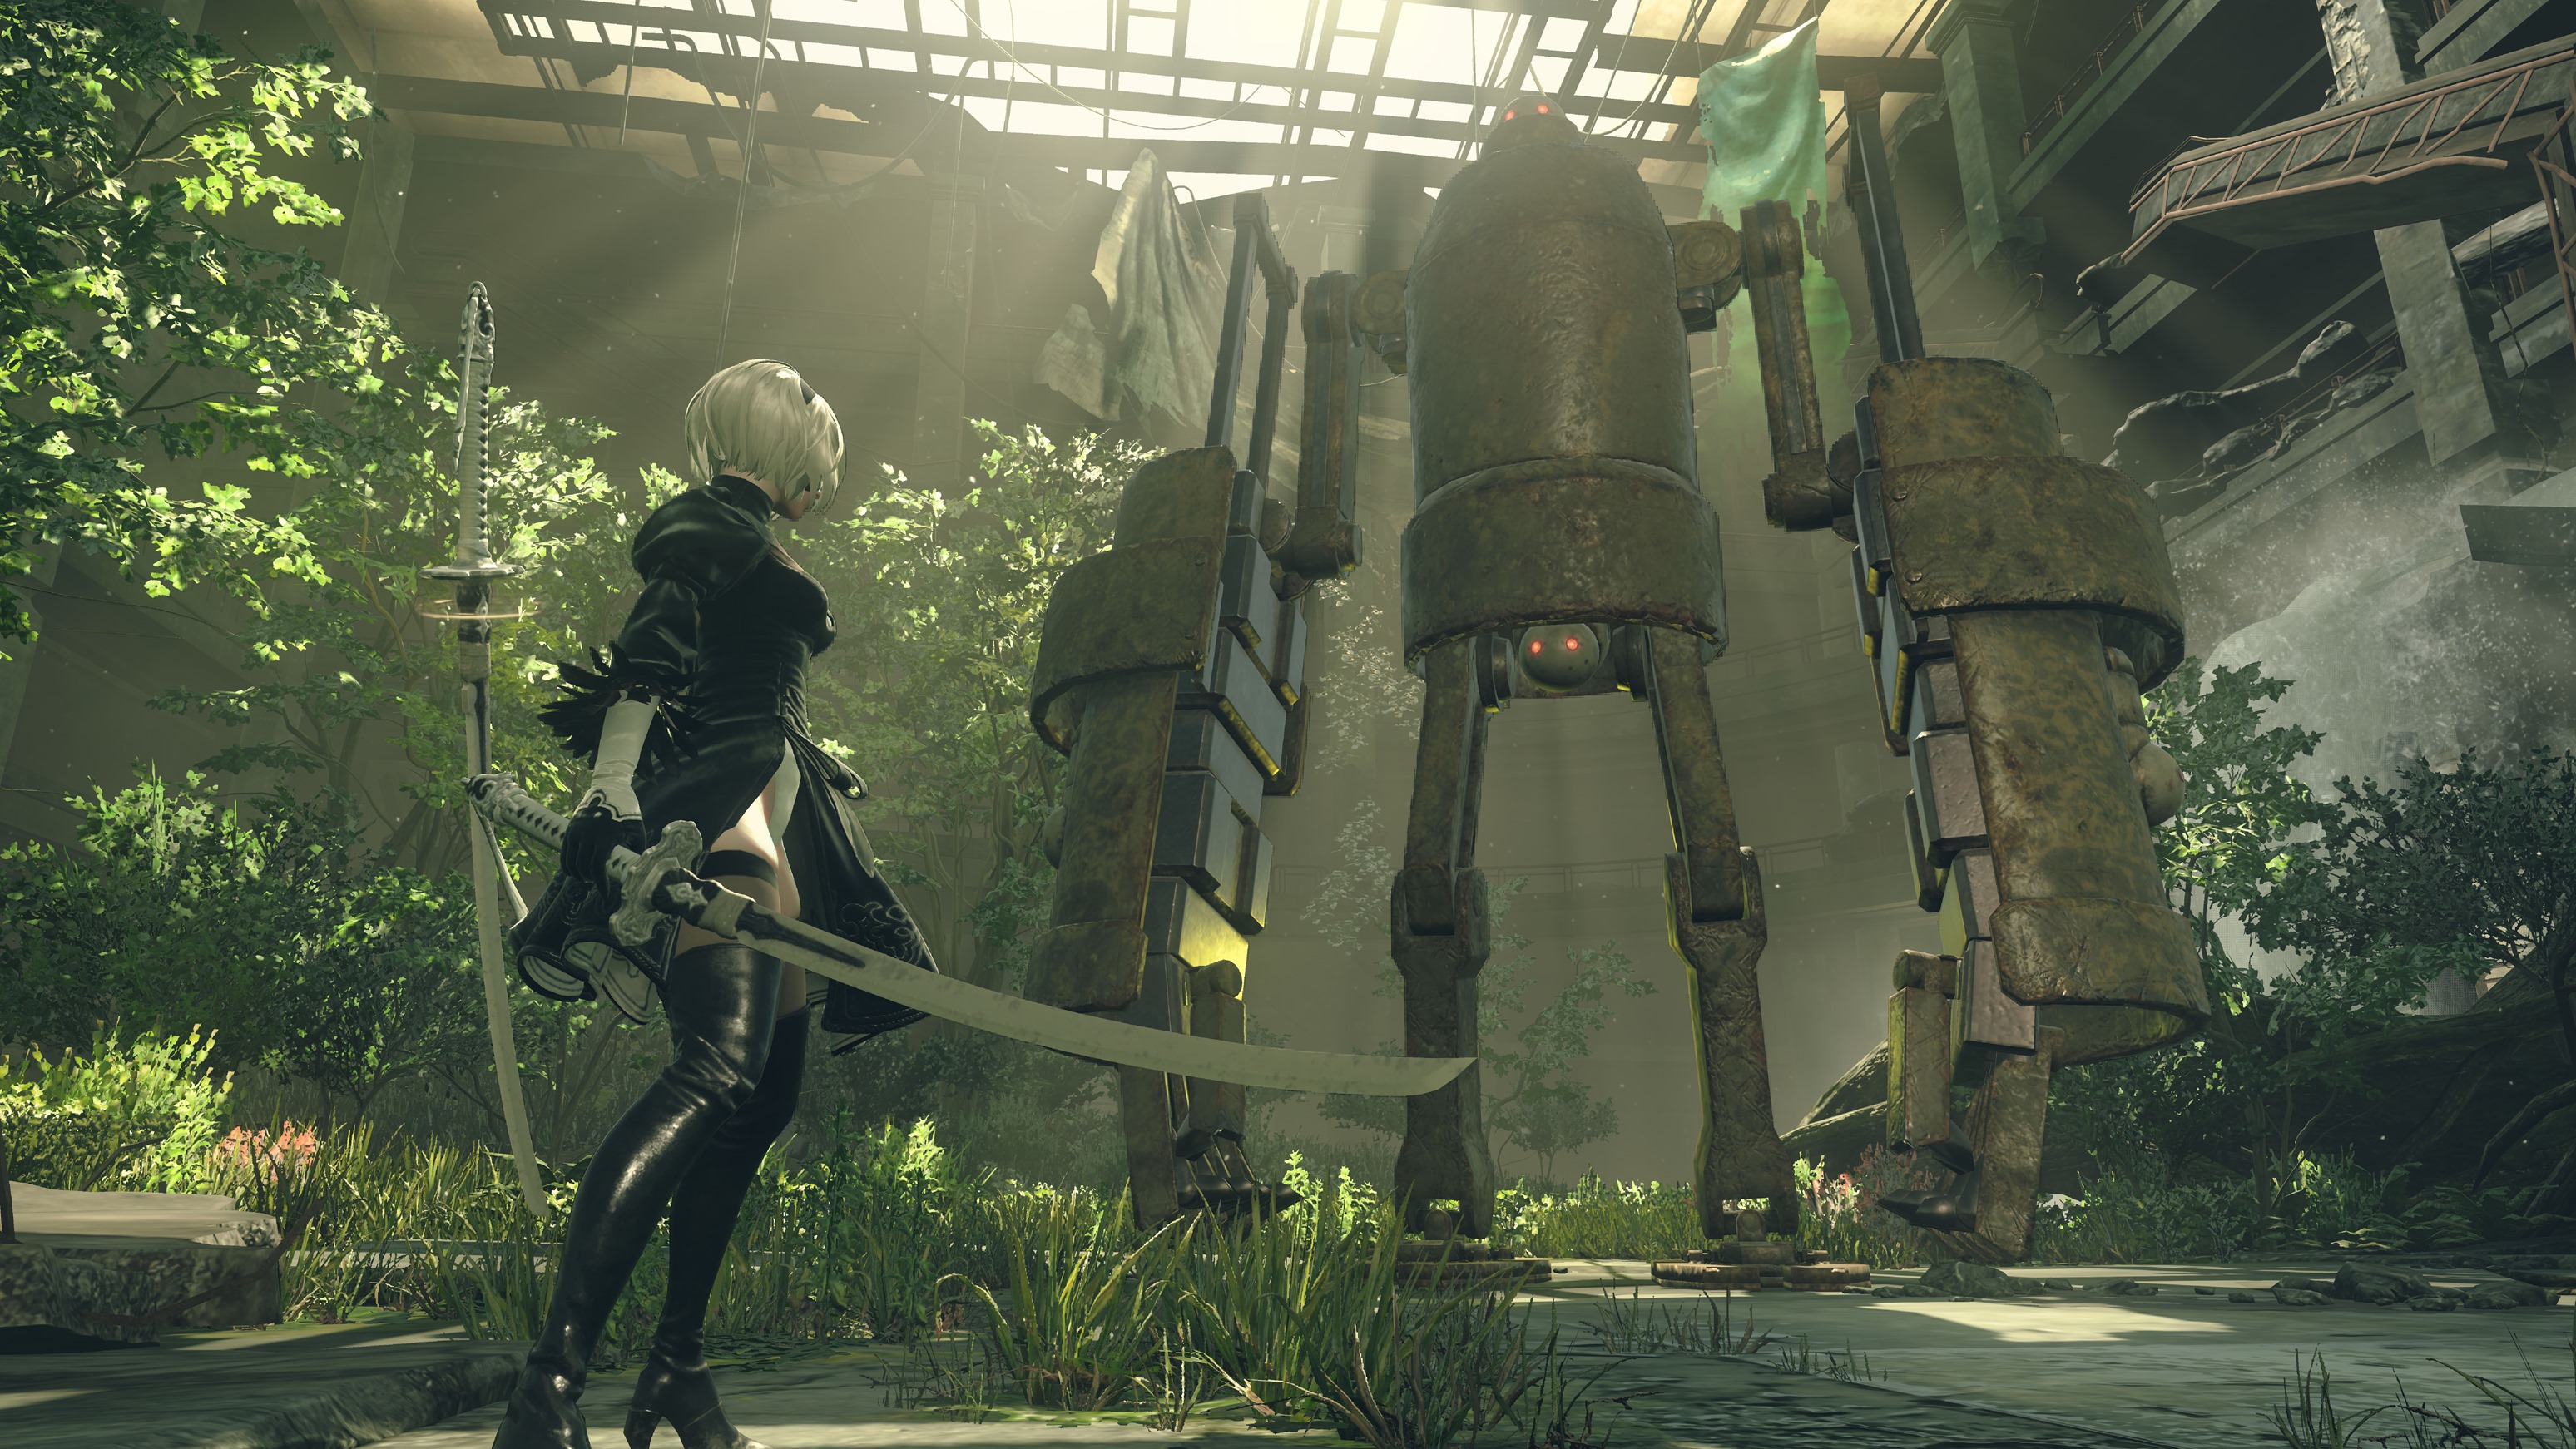 Geld rubber Darts boksen Square Enix Sends Fans A Thank You Message For Supporting NieR: Automata -  Siliconera